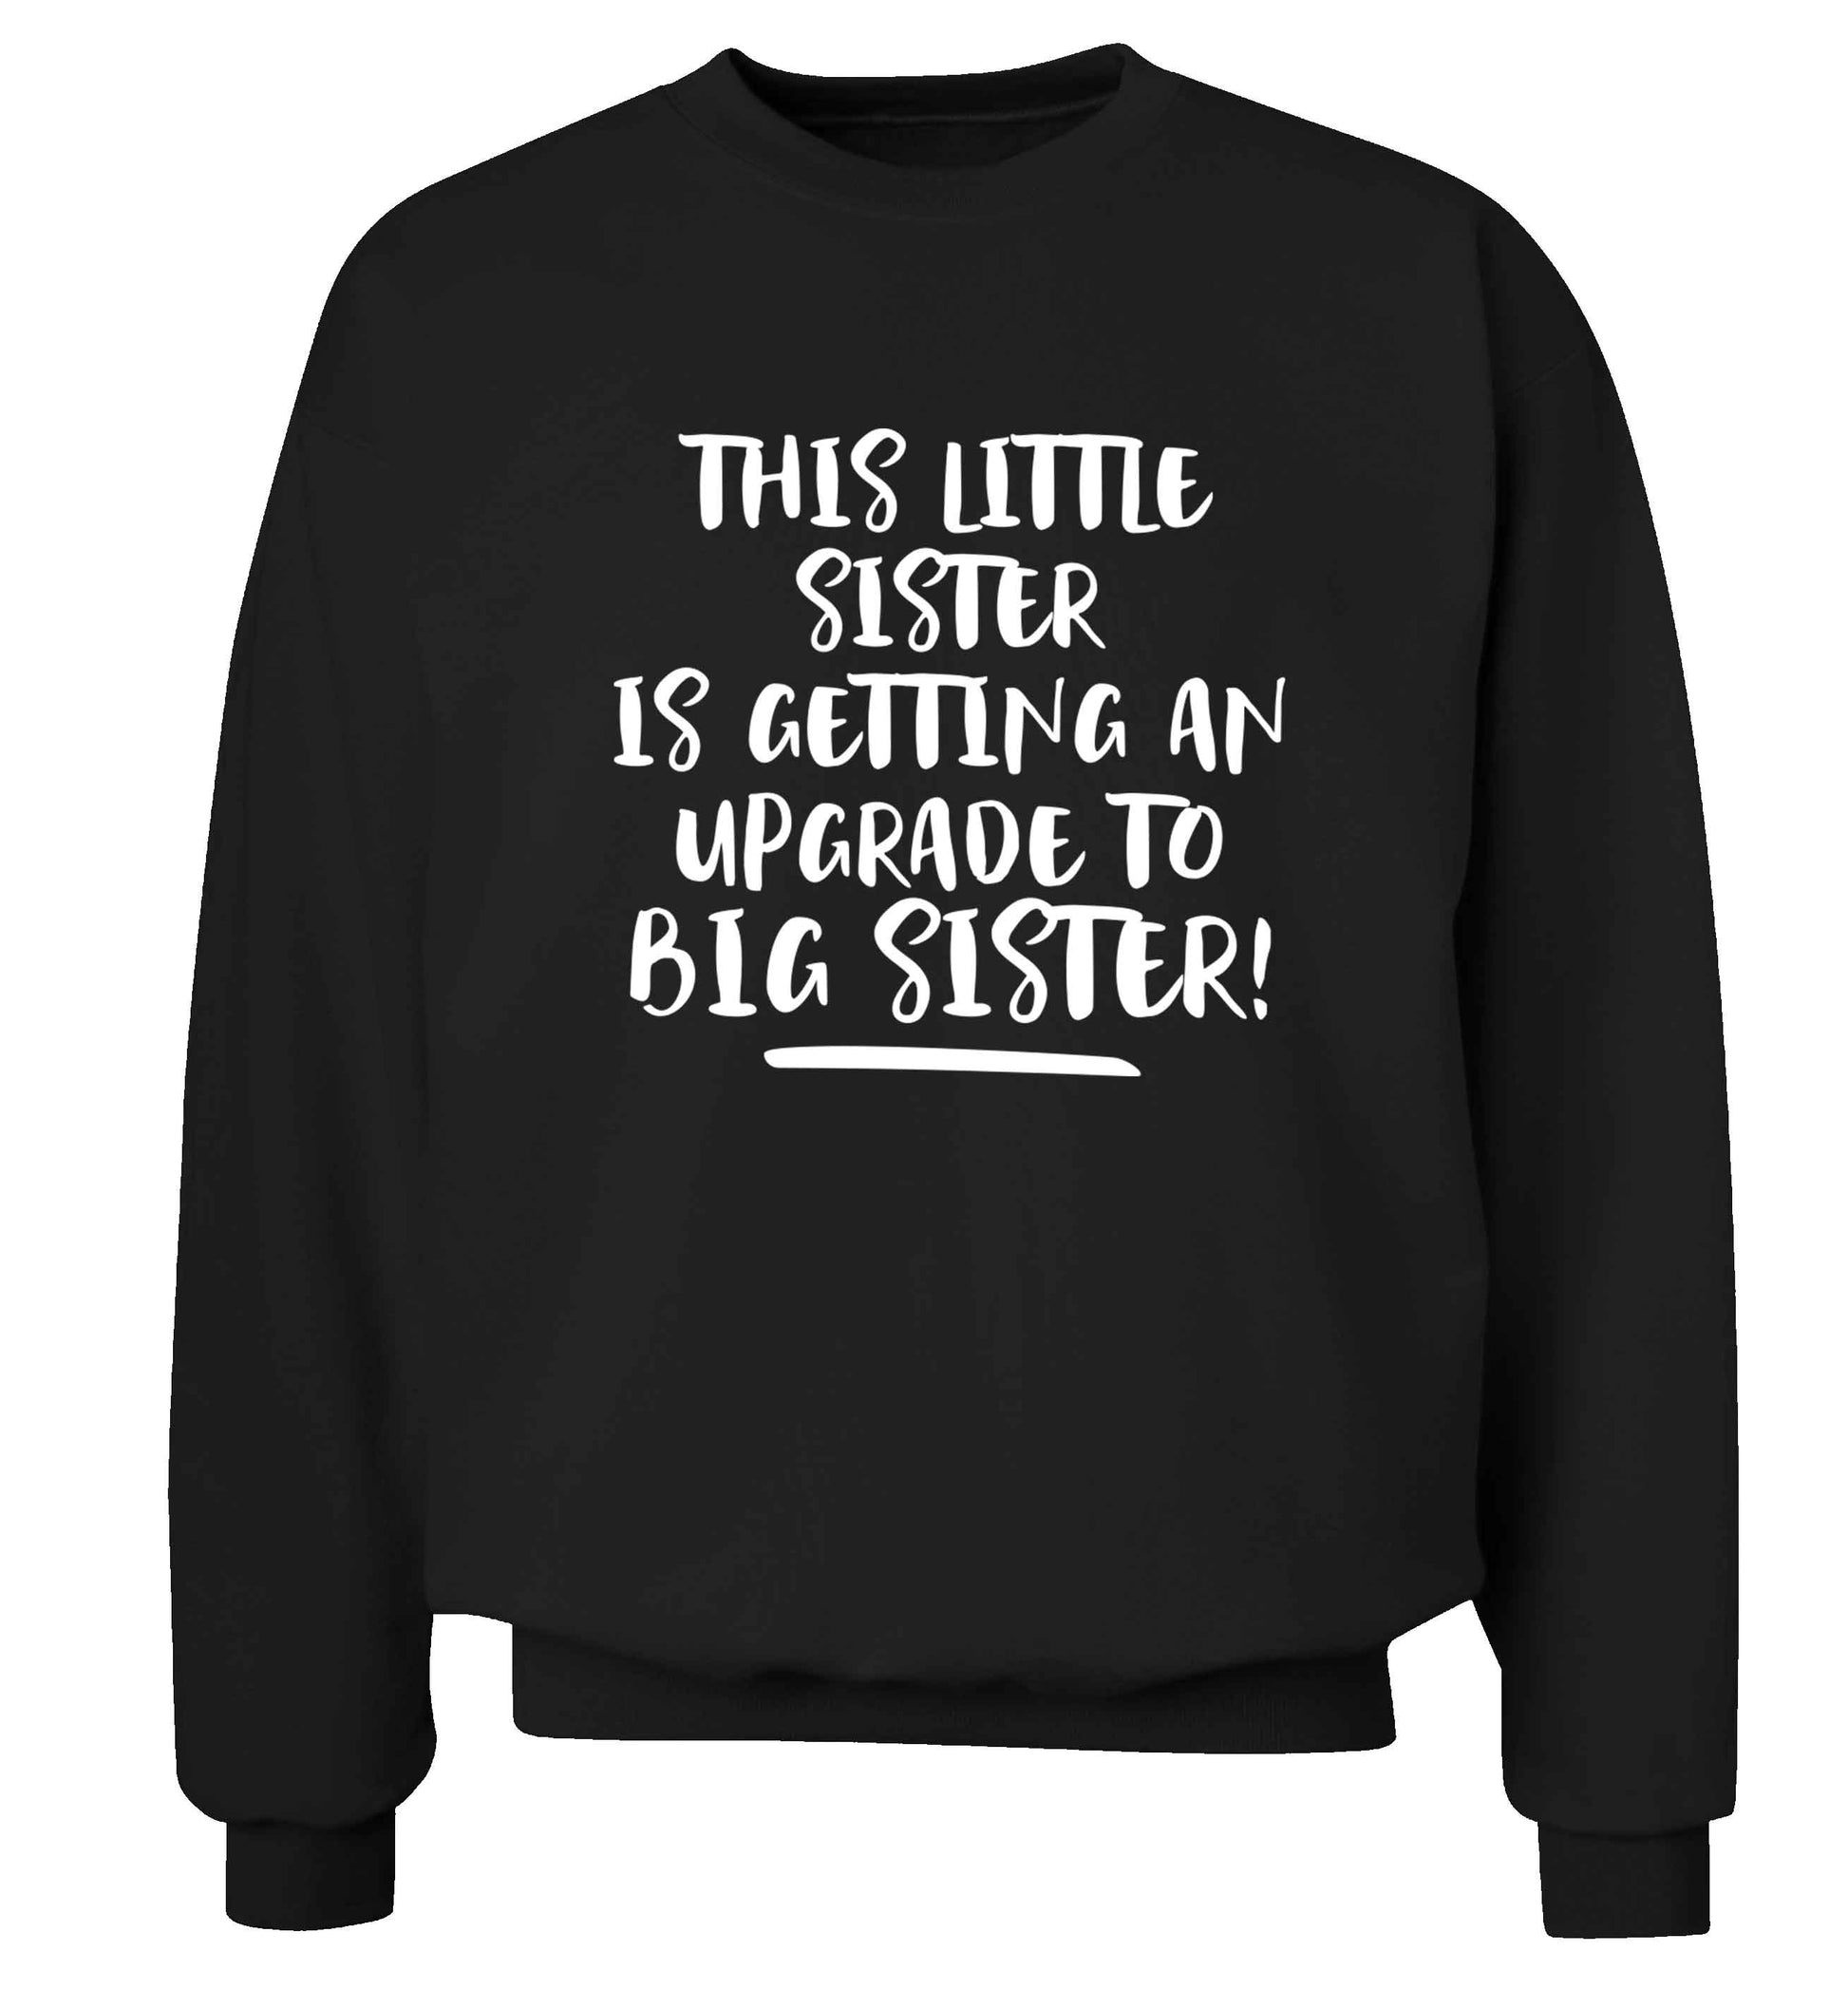 This little sister is getting an upgrade to big sister! Adult's unisex black Sweater 2XL